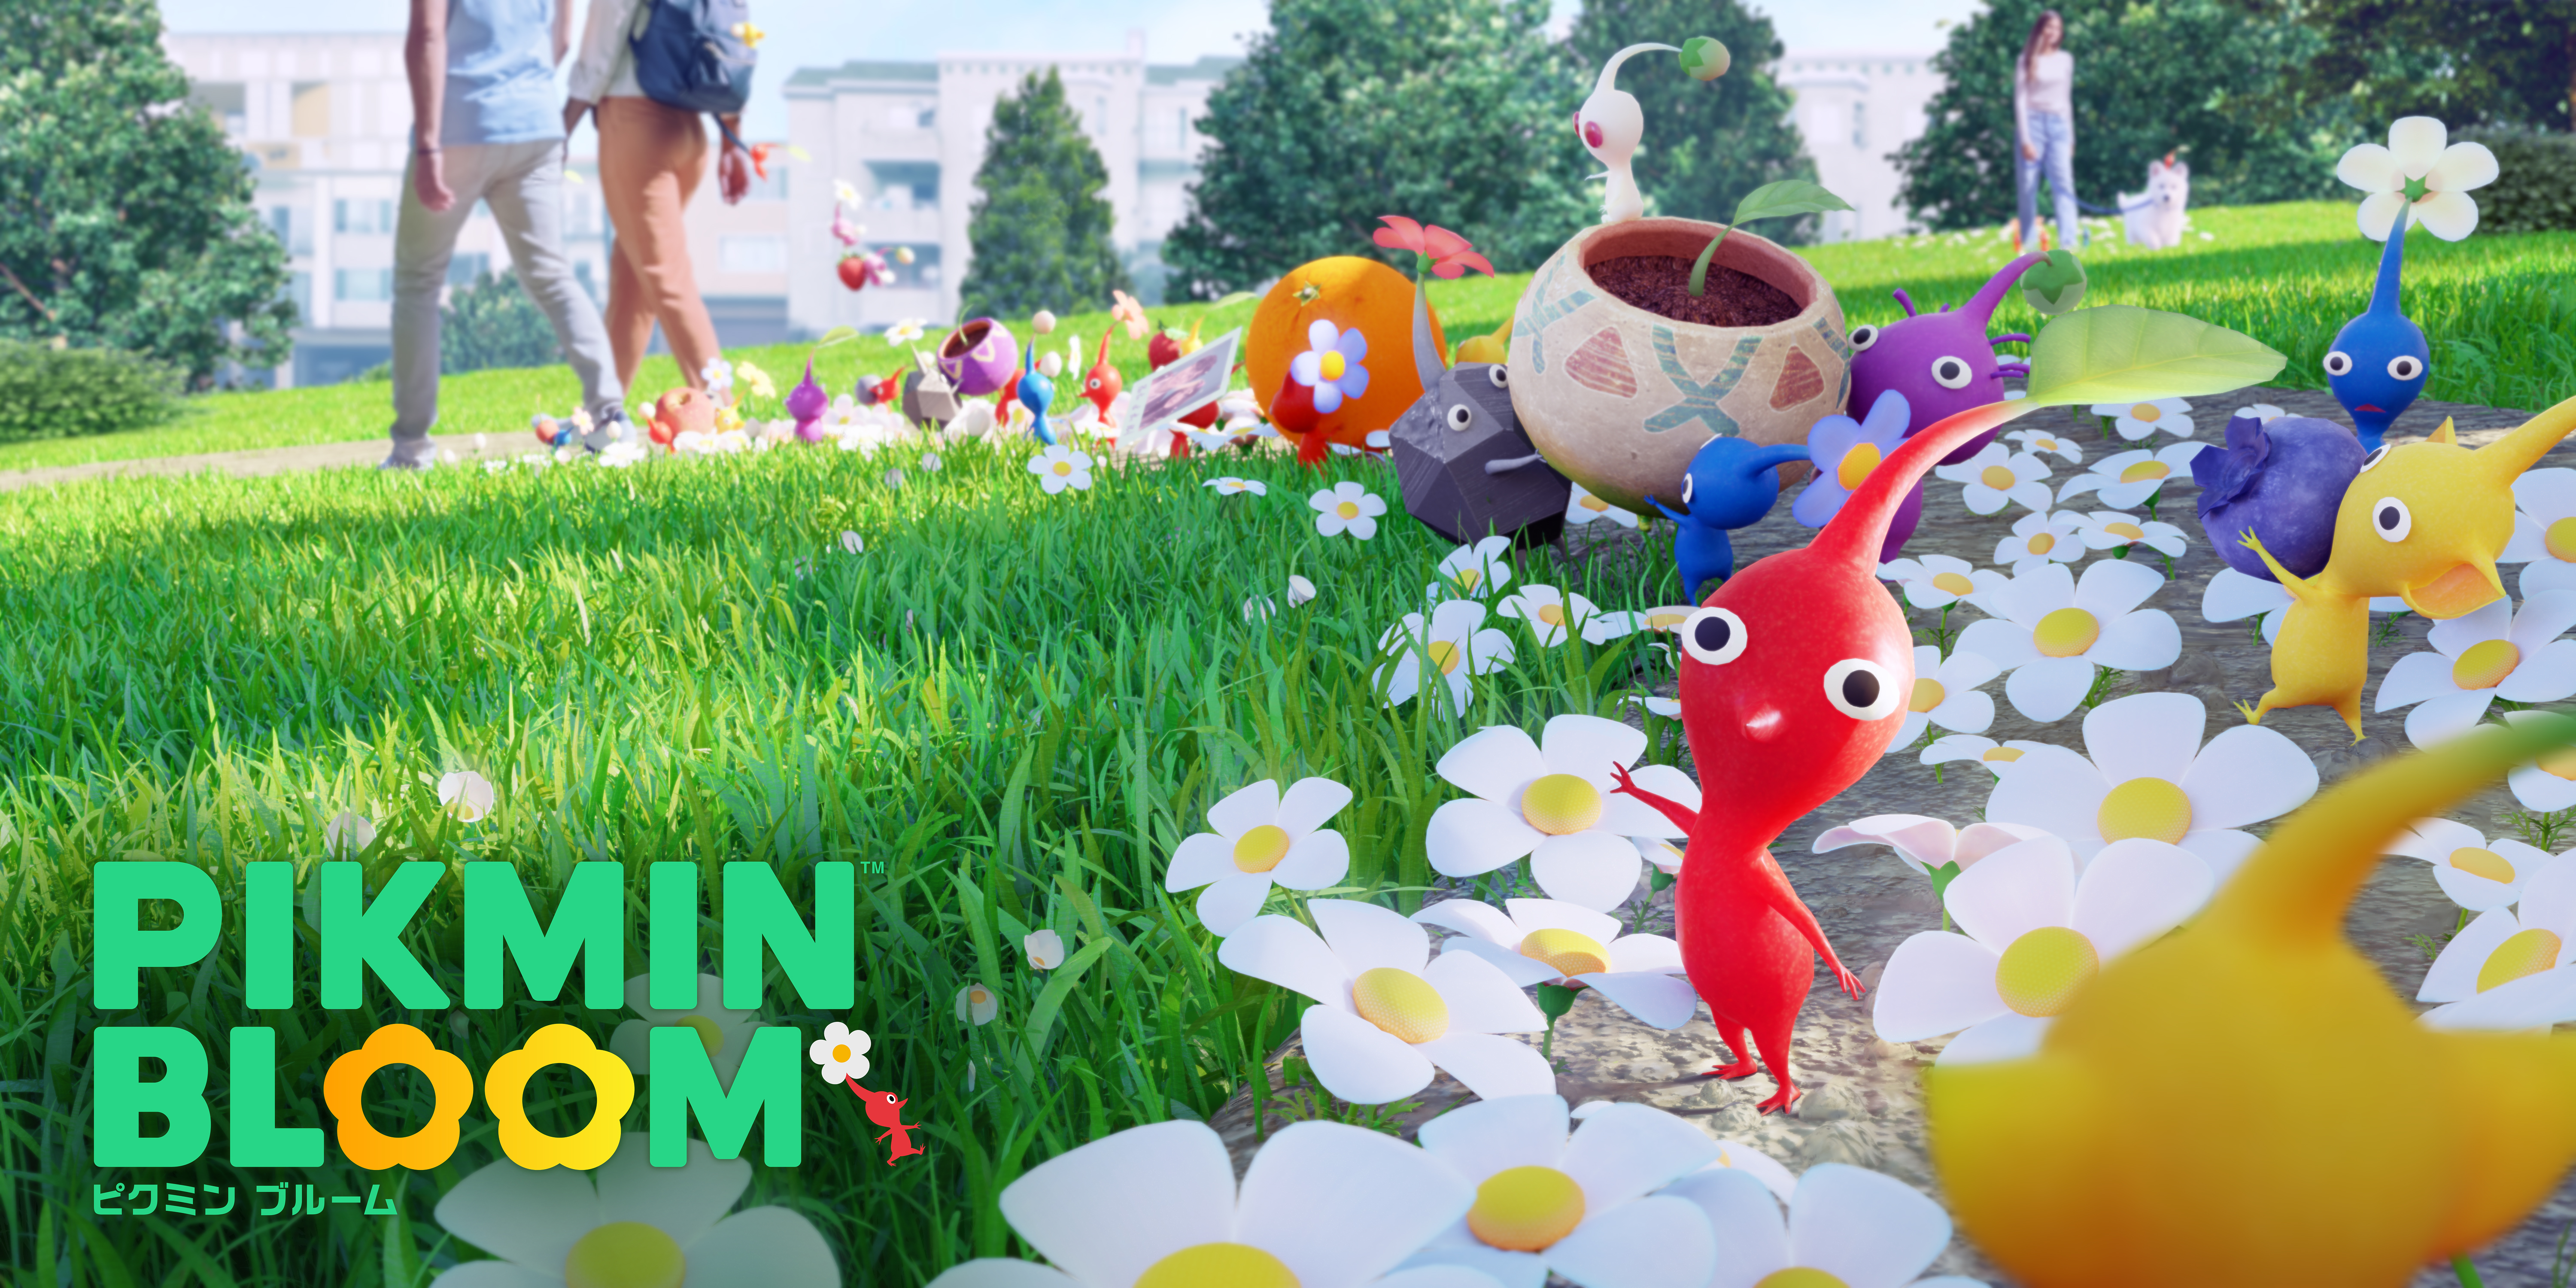 Nianticと任天堂、『ピクミン』のスマホアプリ「Pikmin Bloom」を一部地域で配信開始！　日本でも数日以内の公開見込み